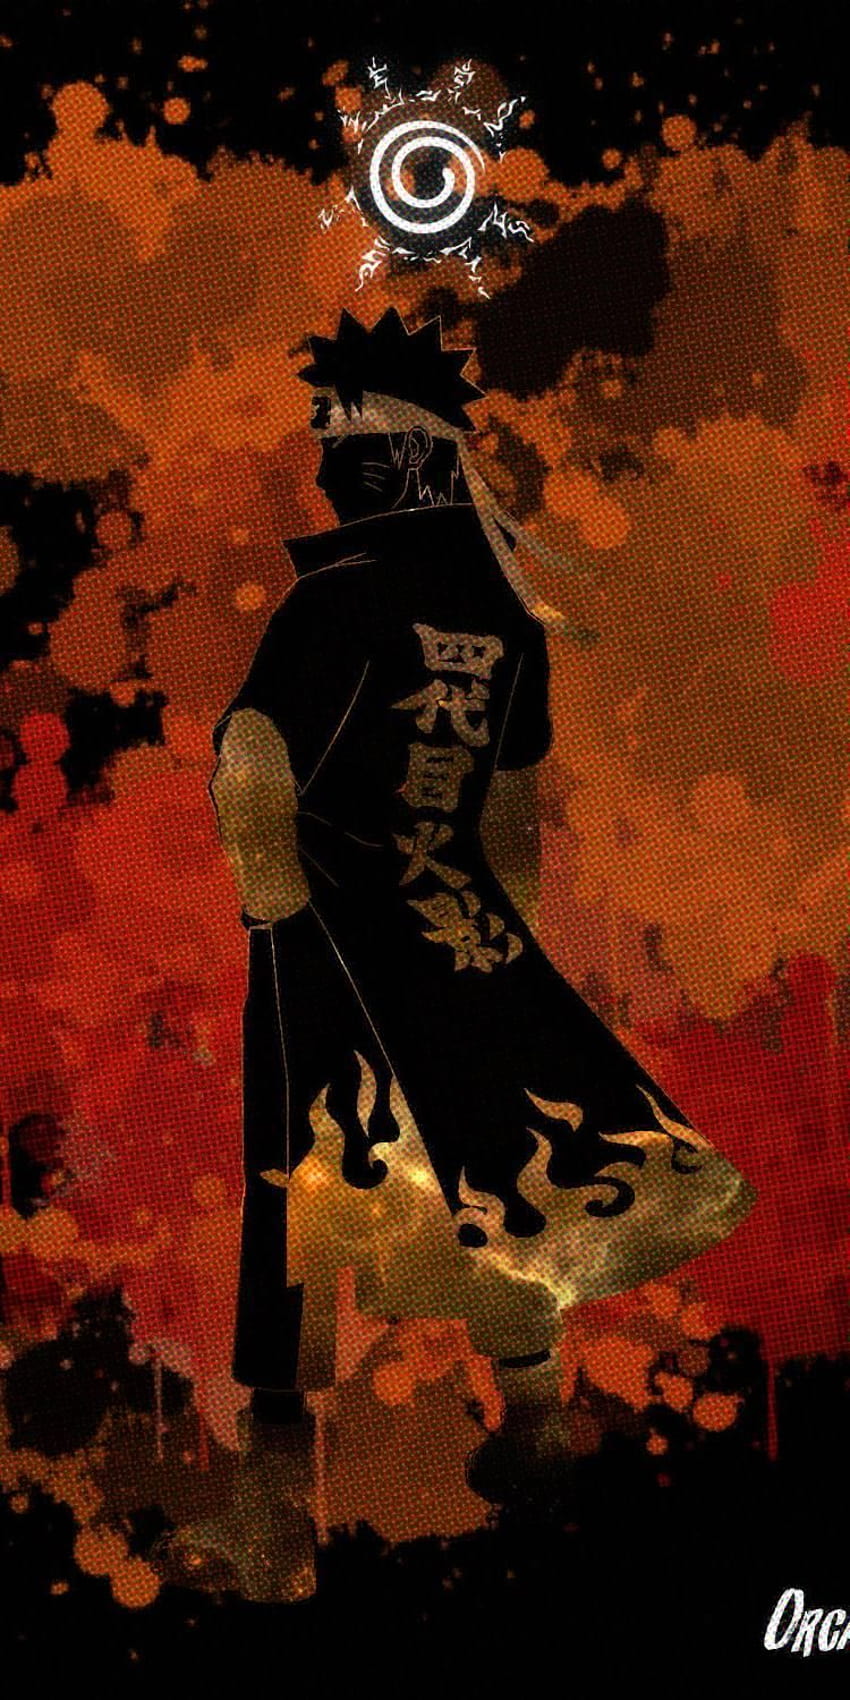 The 7th Hokage [1920x1080] Need trendy case? Check out http://bit.ly/2A9E5zw, naruto orange HD phone wallpaper